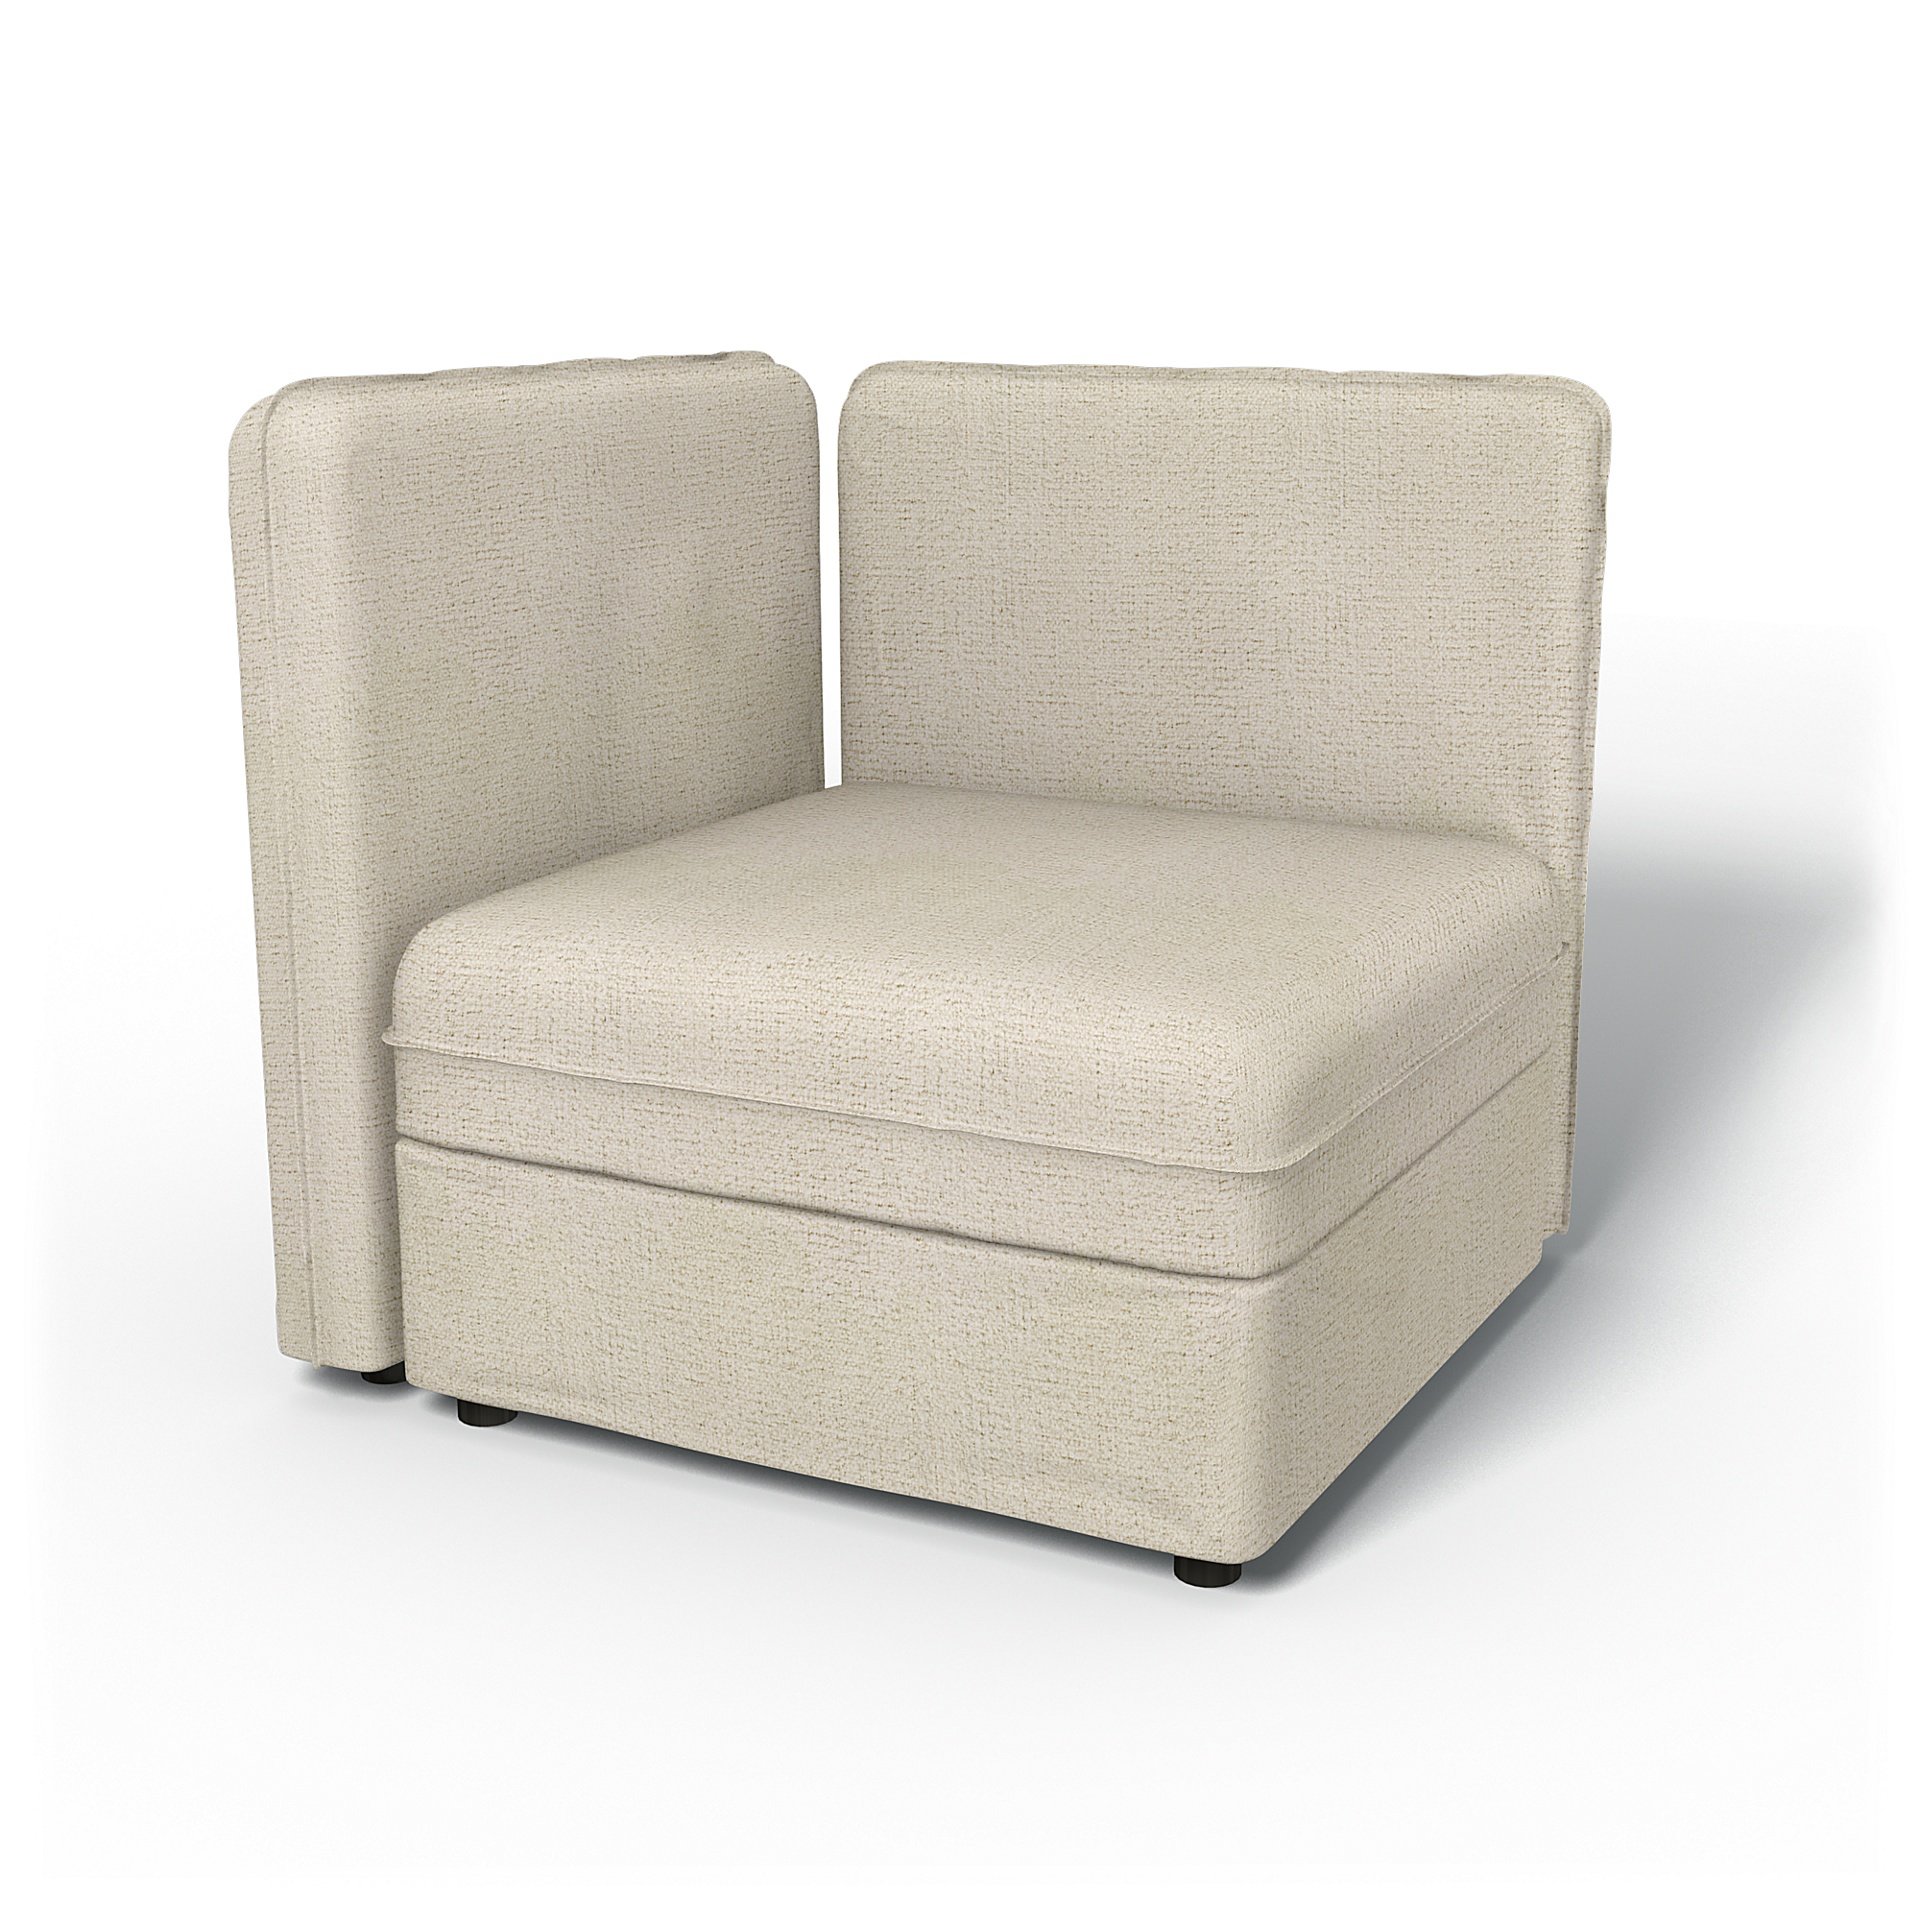 IKEA - Vallentuna Seat Module with Low Back and Storage Cover 80x80cm 32x32in, Ecru, Boucle & Textur